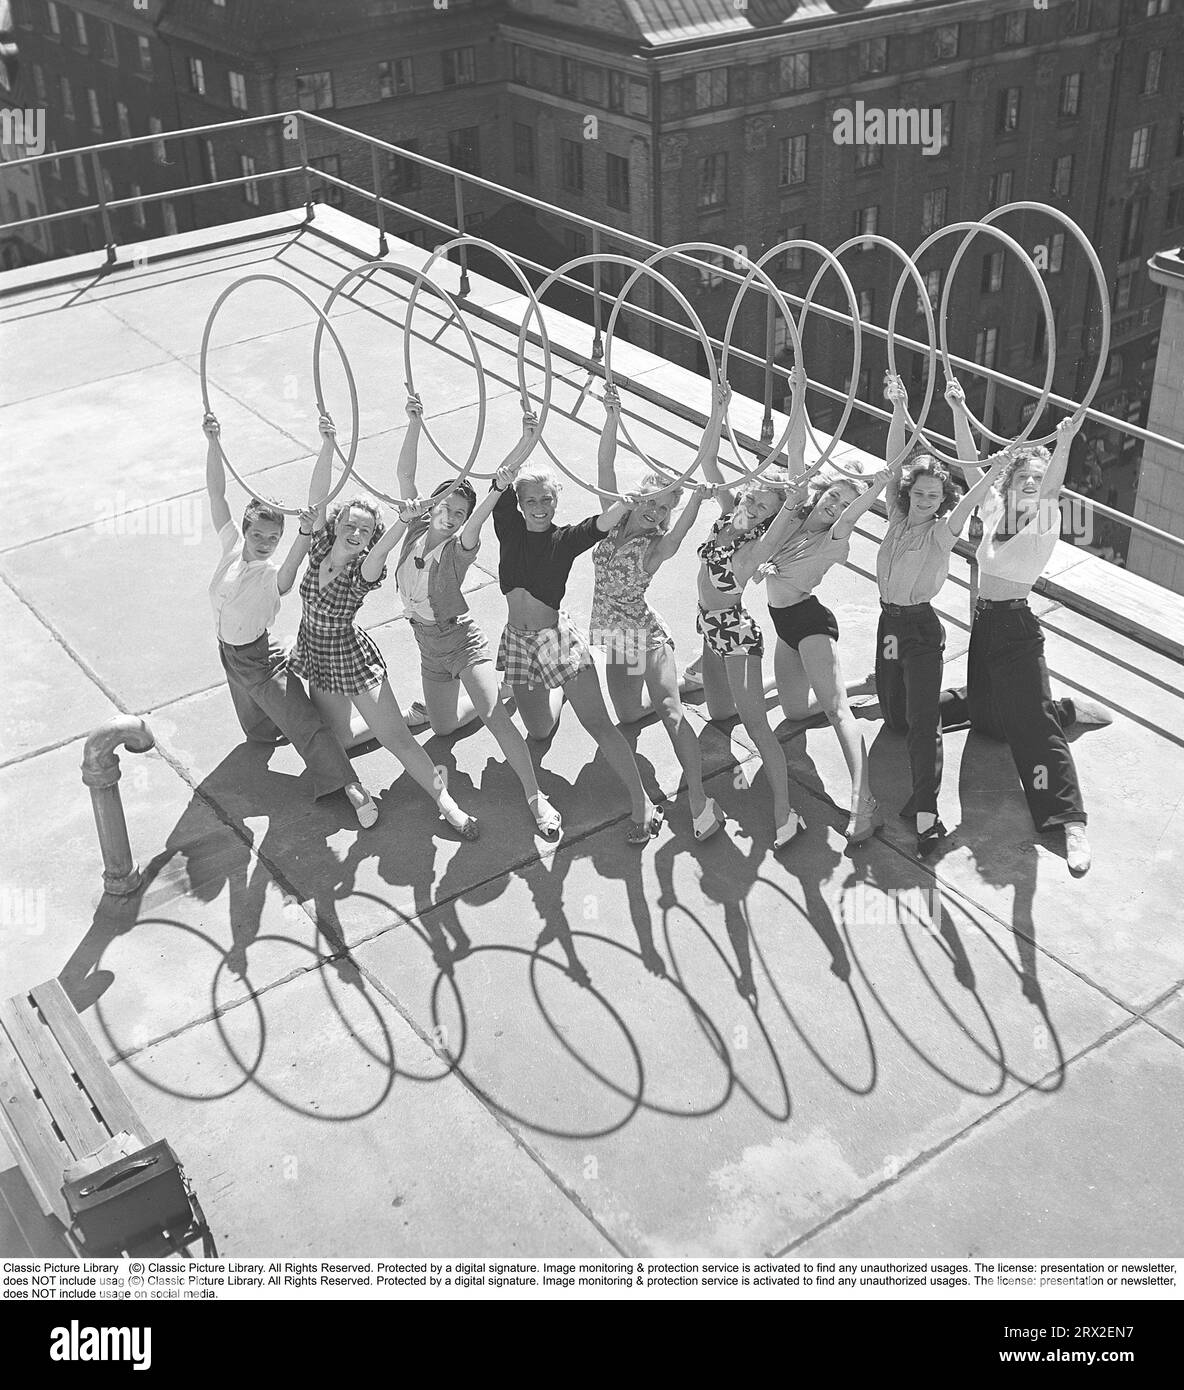 Gymnastics in the 1940s. Young female gymnasts are standing on a rooftop in Stockholm city forming a symmetrical image with the rings shadows in front of them when holding the rings above themselves and posing as they do. Sweden 1945 Kristoffersson ref O143-1 Stock Photo